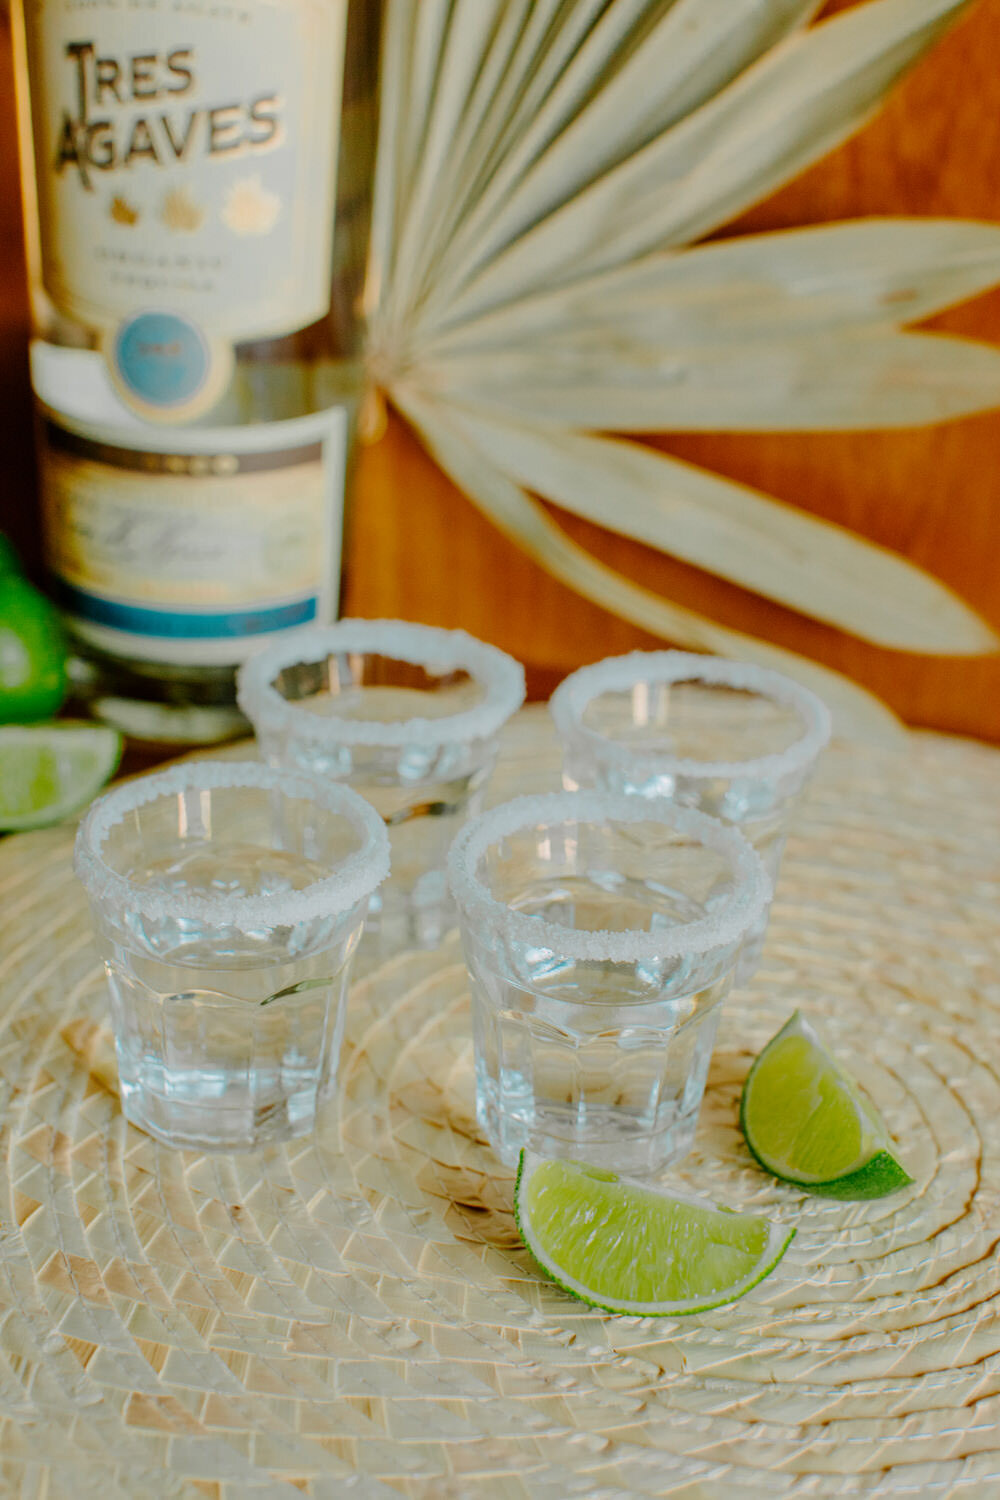 Tres-Agaves-Tequila-Commercial-Photography.jpg